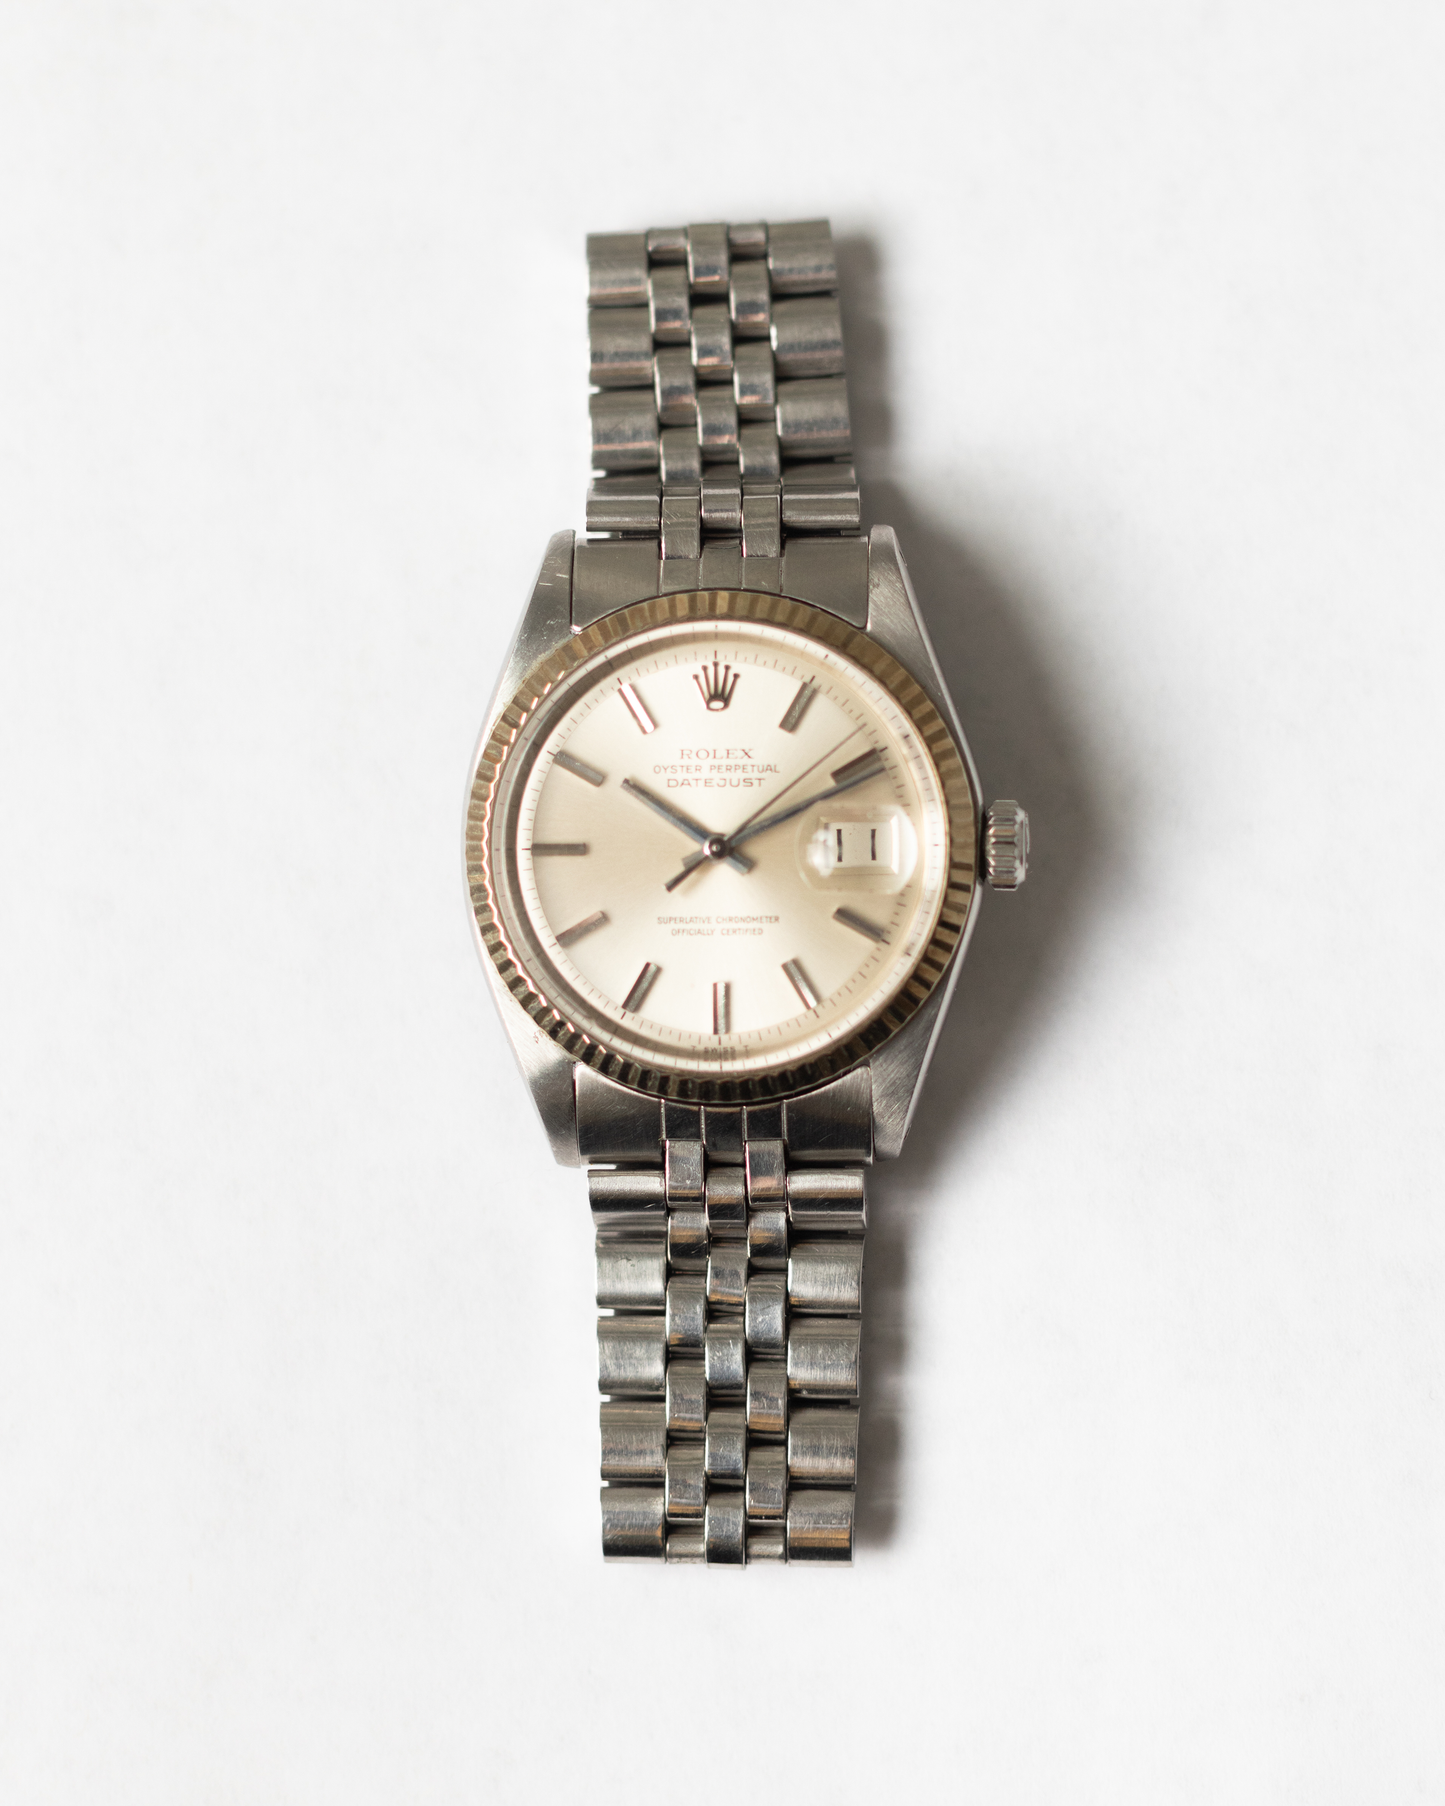 1971 Rolex Oyster Perpetual Datejust